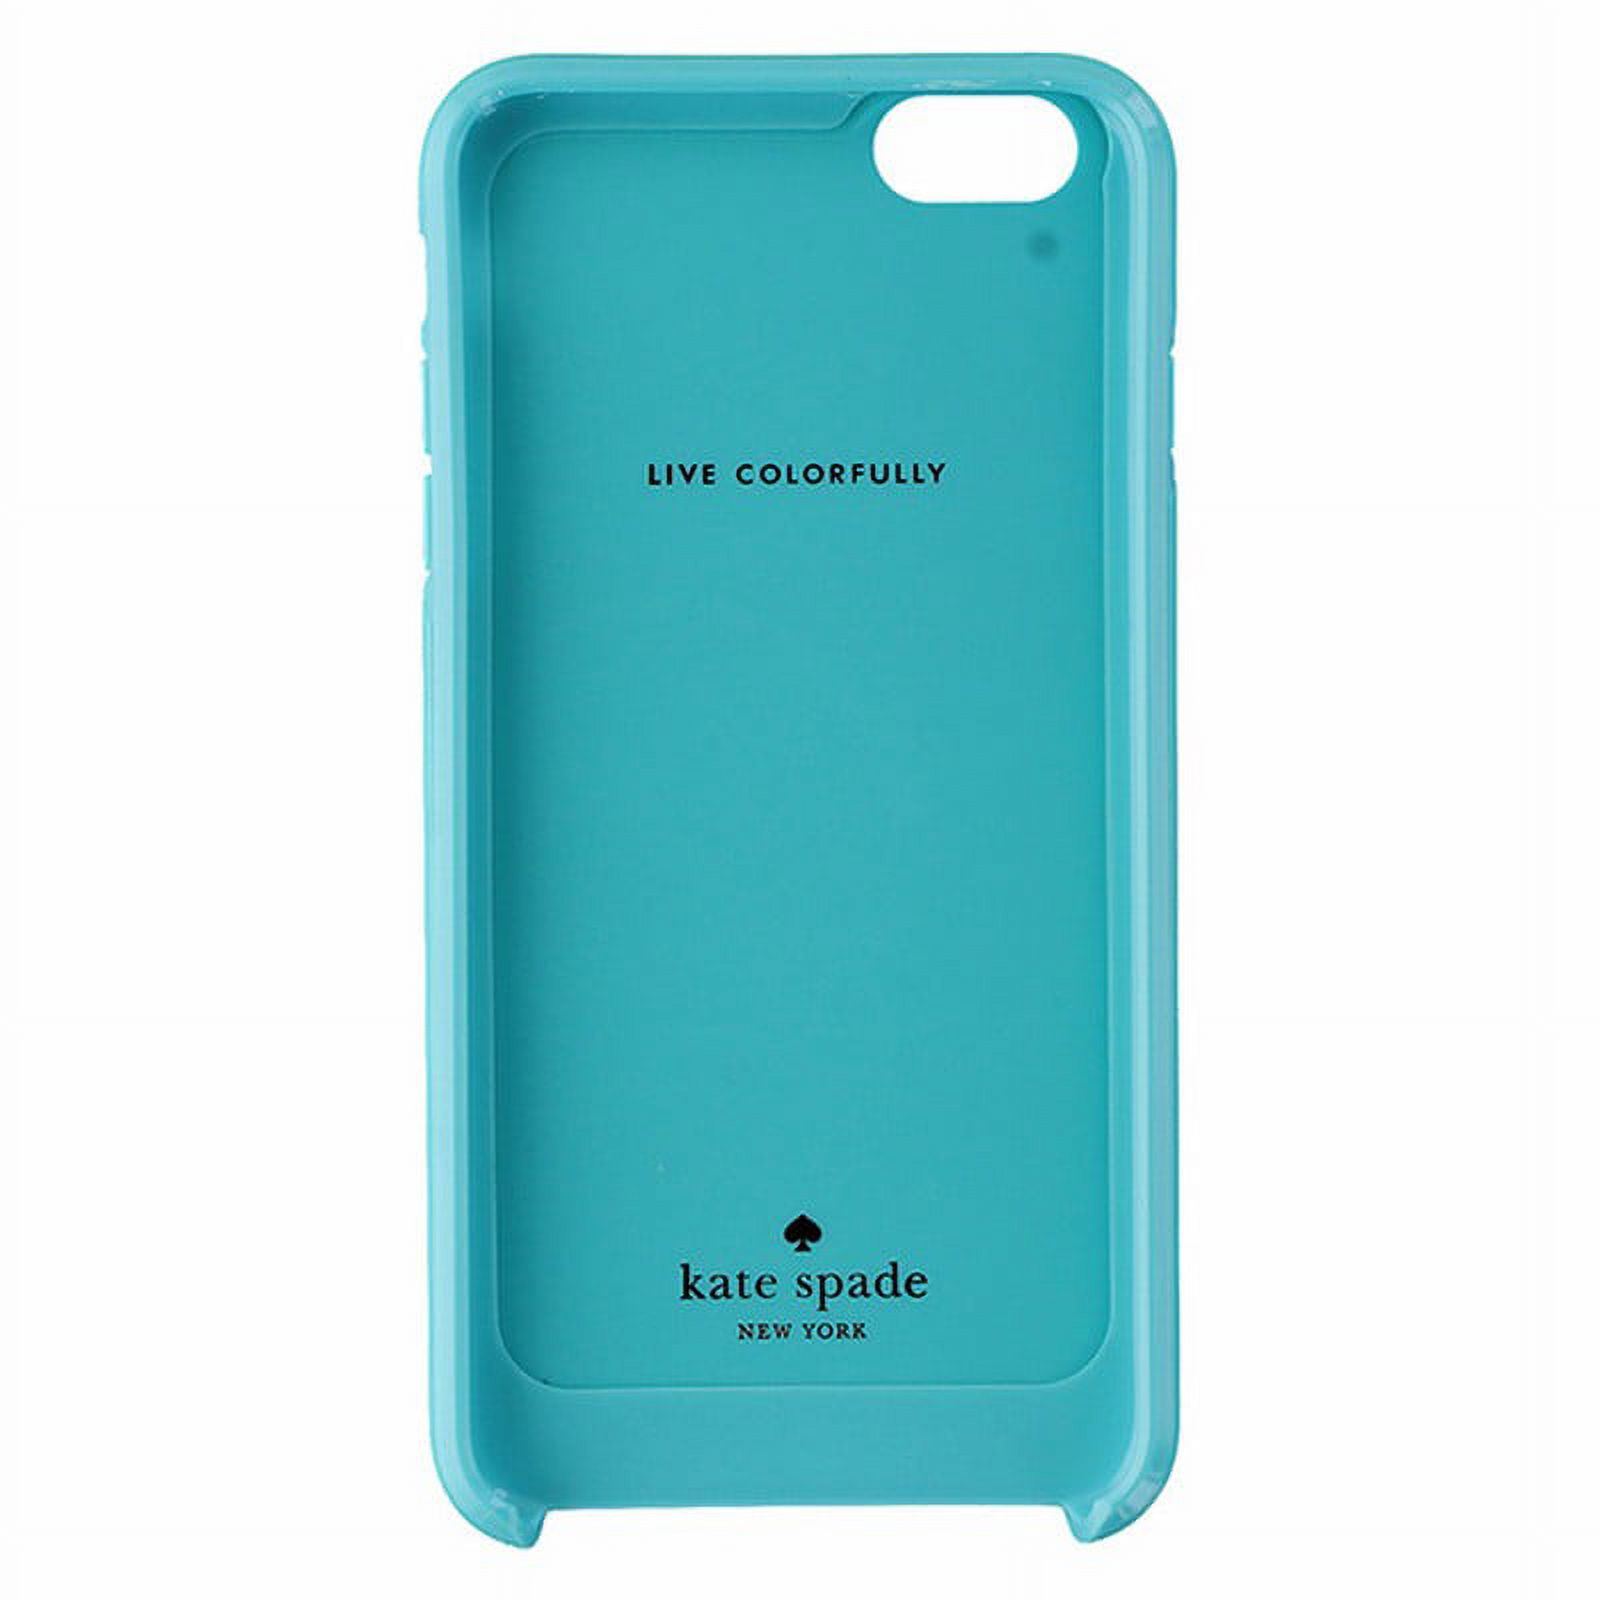 Kate Spade Hybrid Case for iPhone 6 Plus/ 6s Plus - Candy Stripes / Light Blue - image 2 of 3